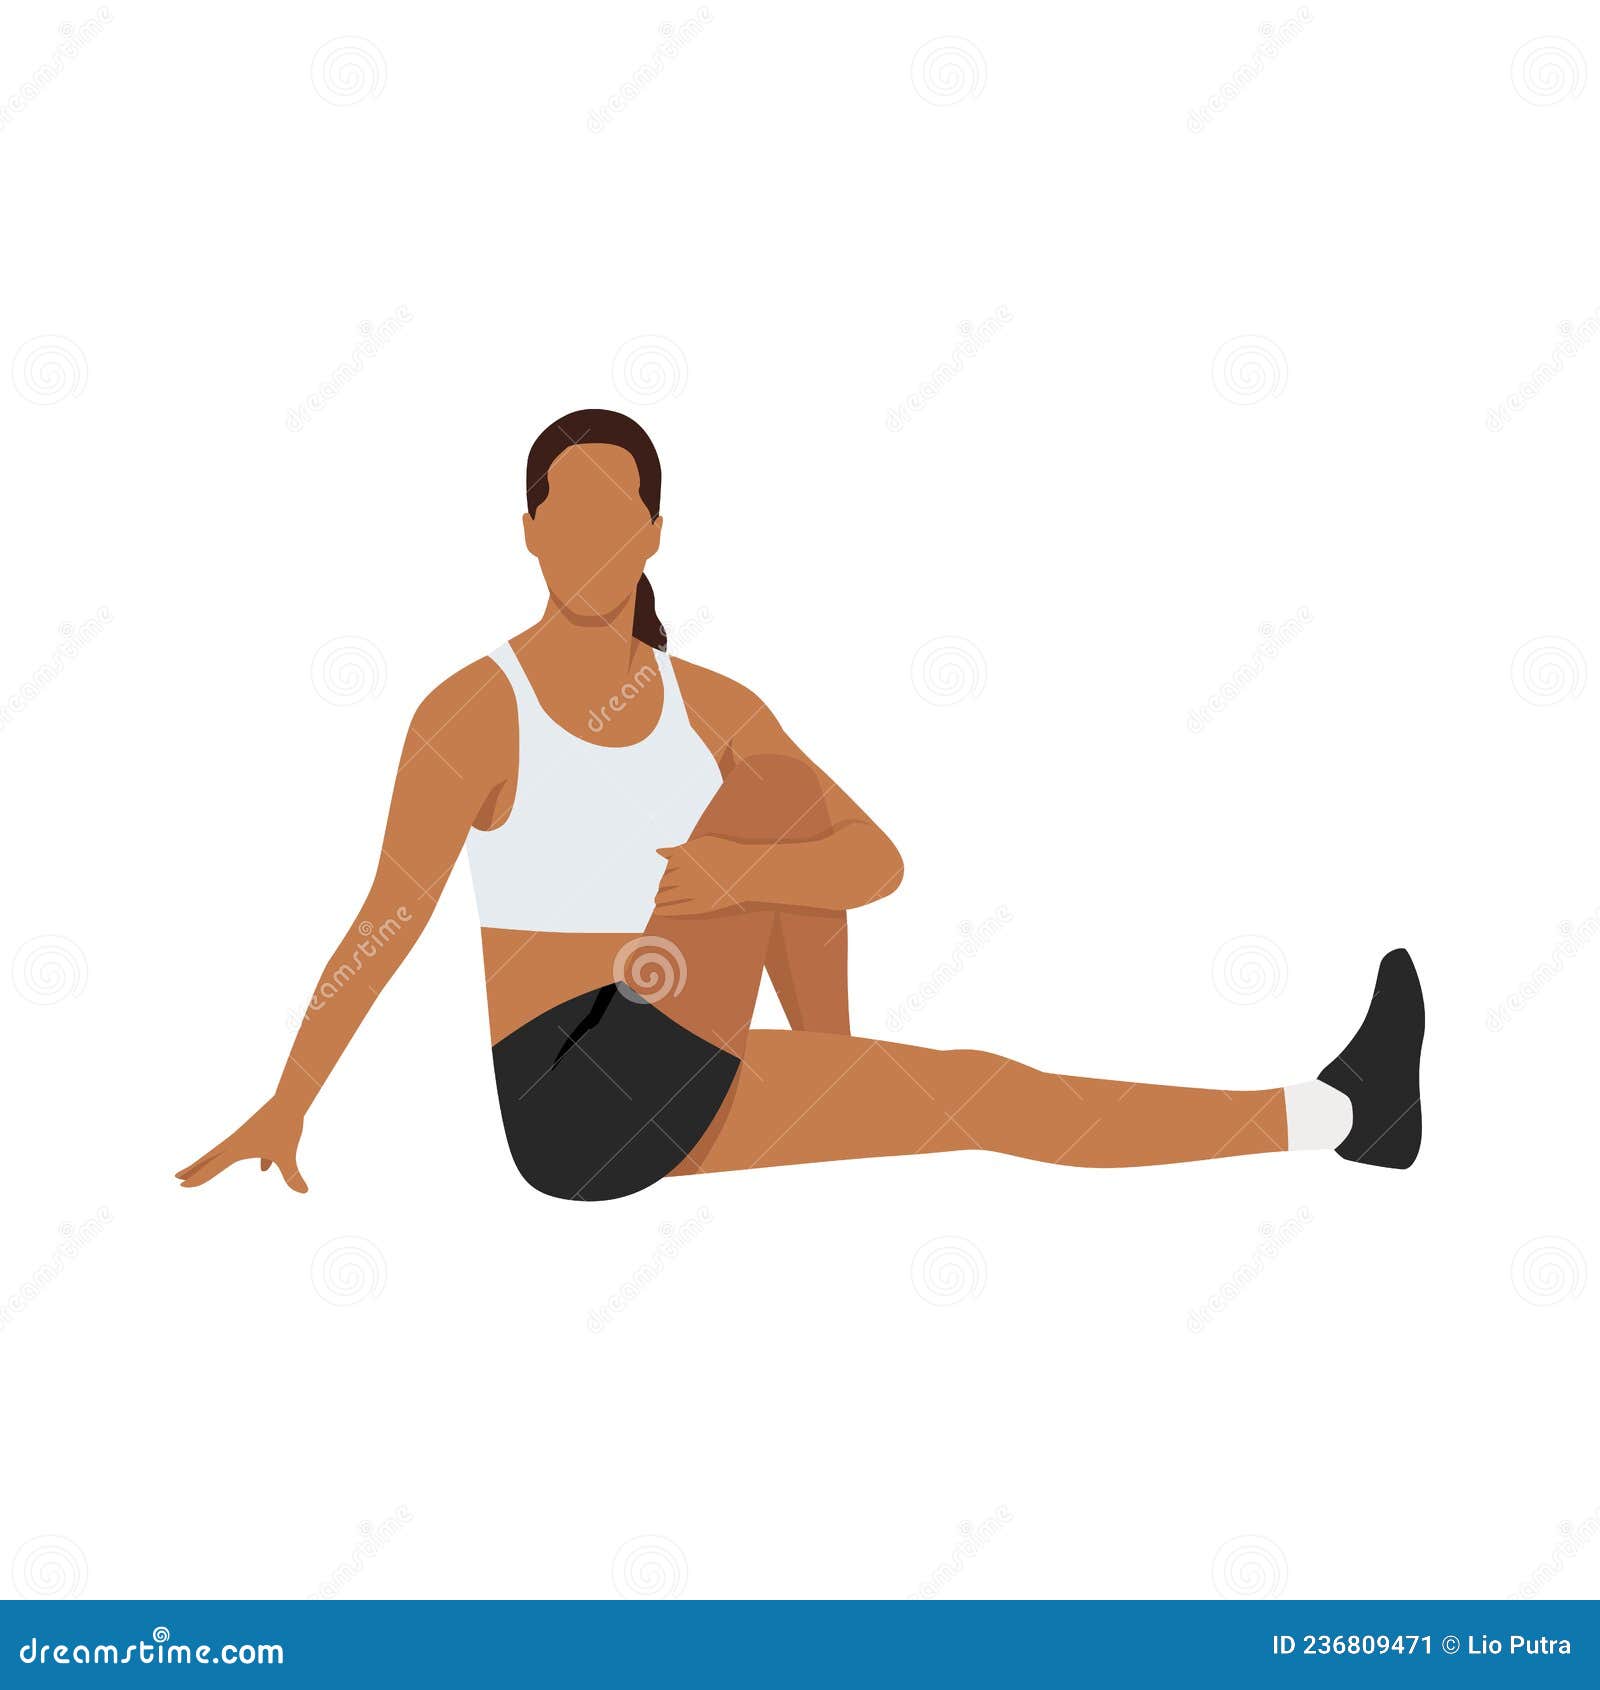 woman doing seated twist stretch exercise.